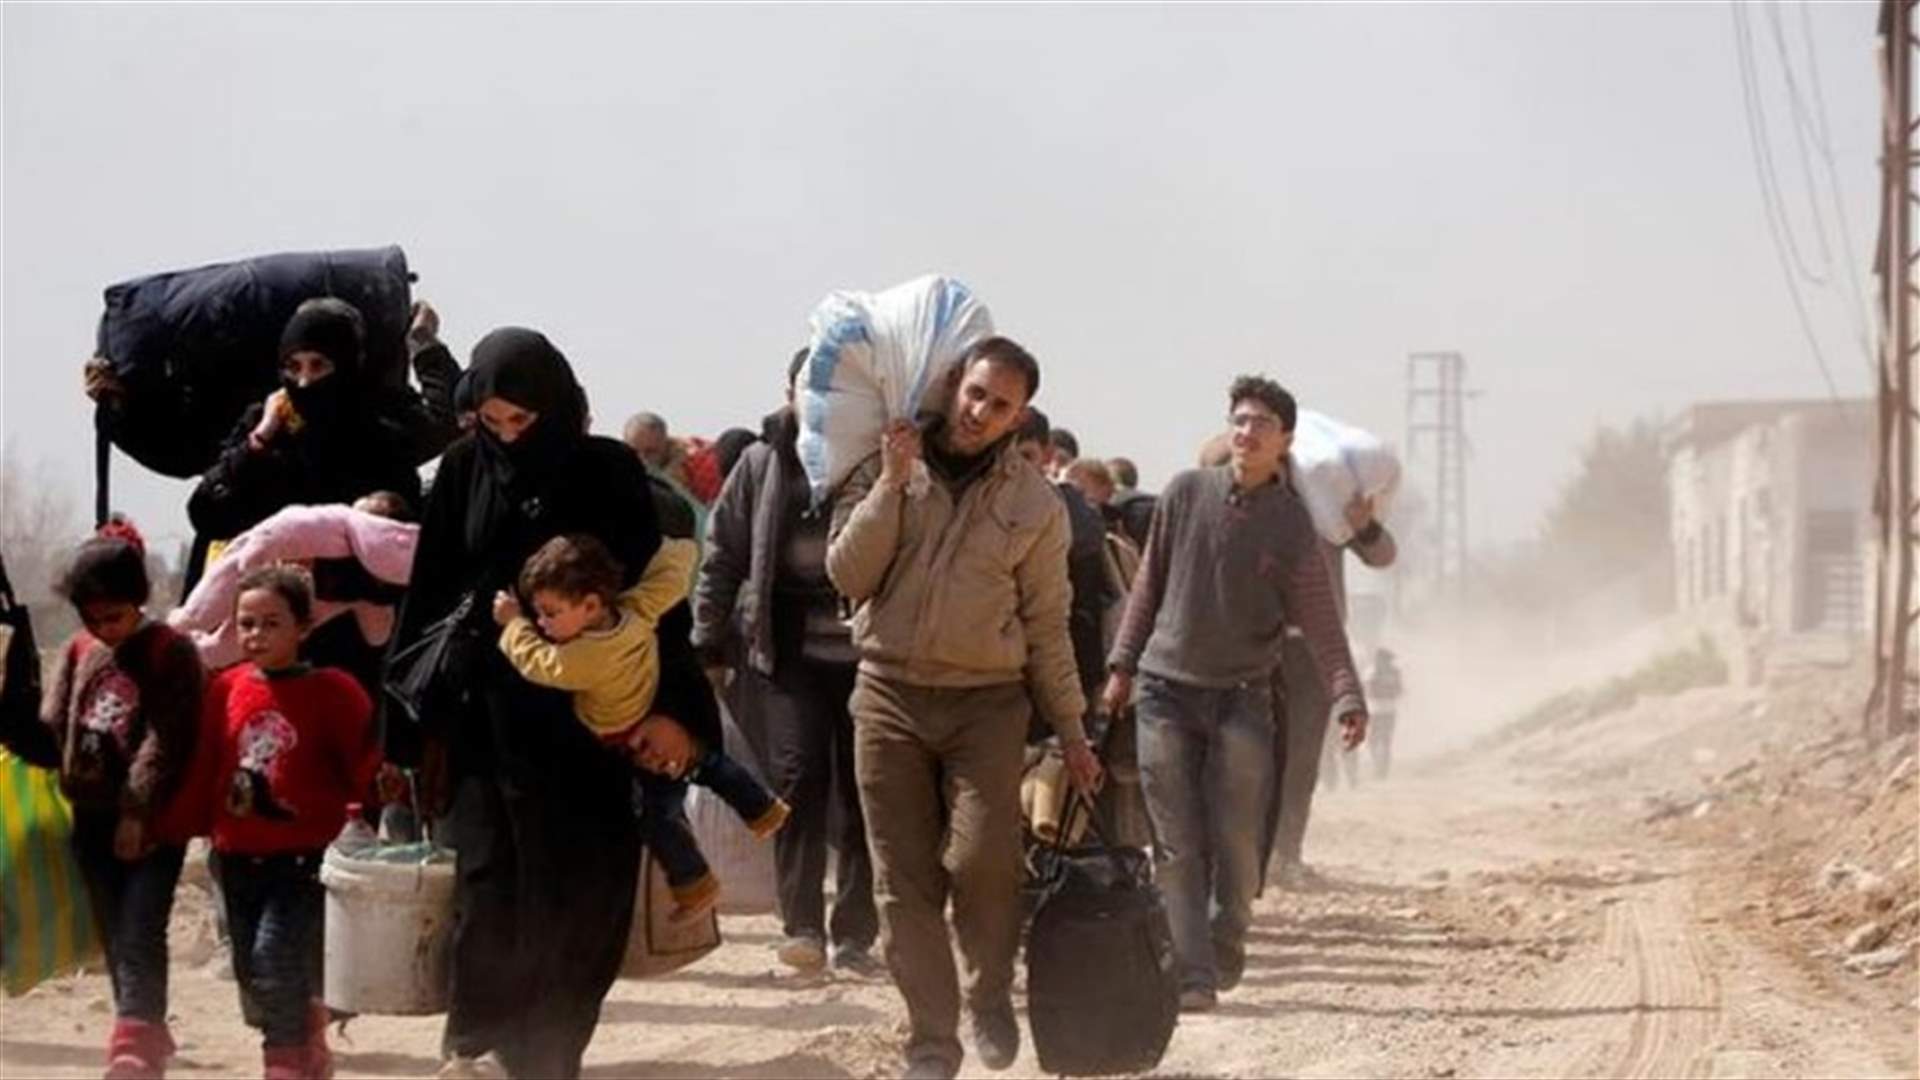 Russian, Syrian authorities set up center for refugees returning to Syria